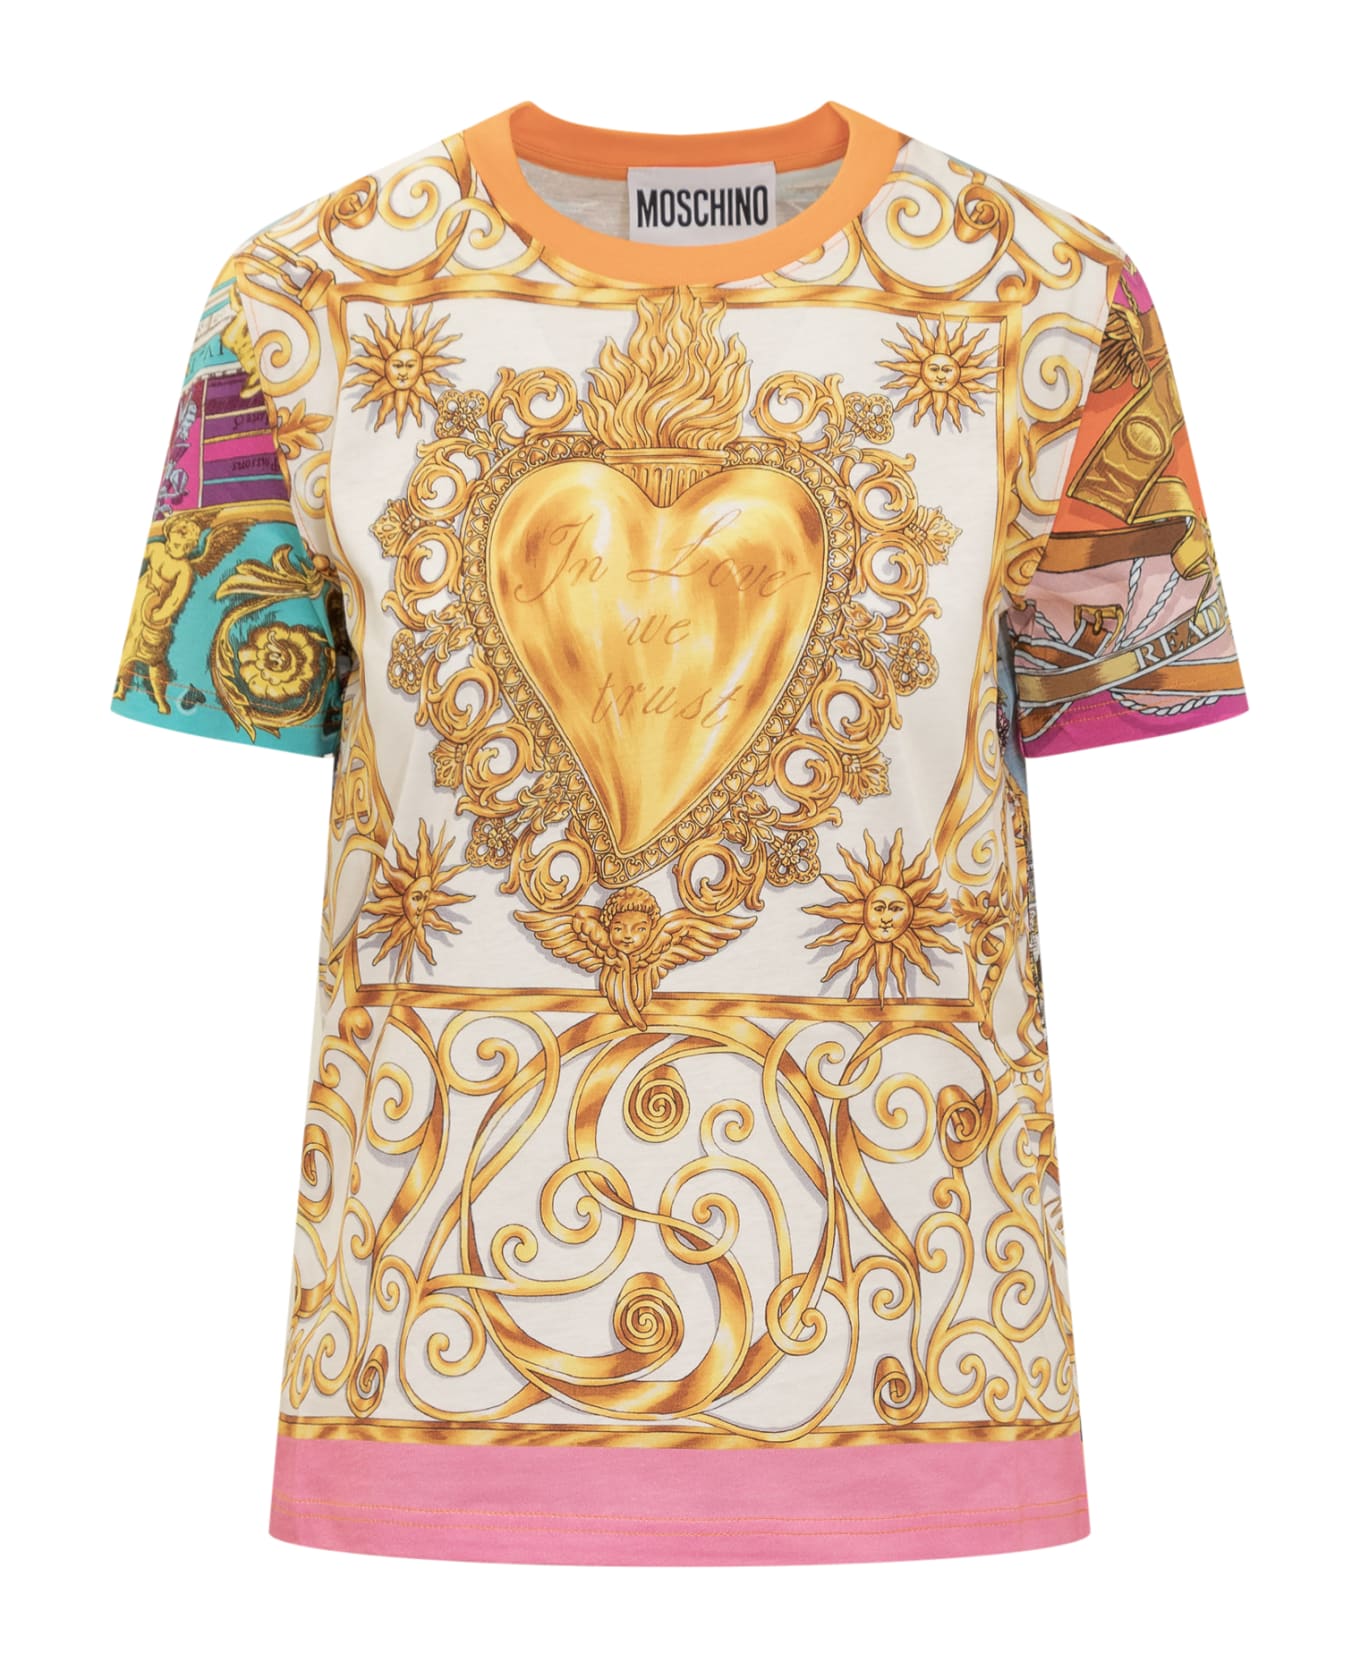 Moschino Archive Scarves Print T-shirt Tシャツ